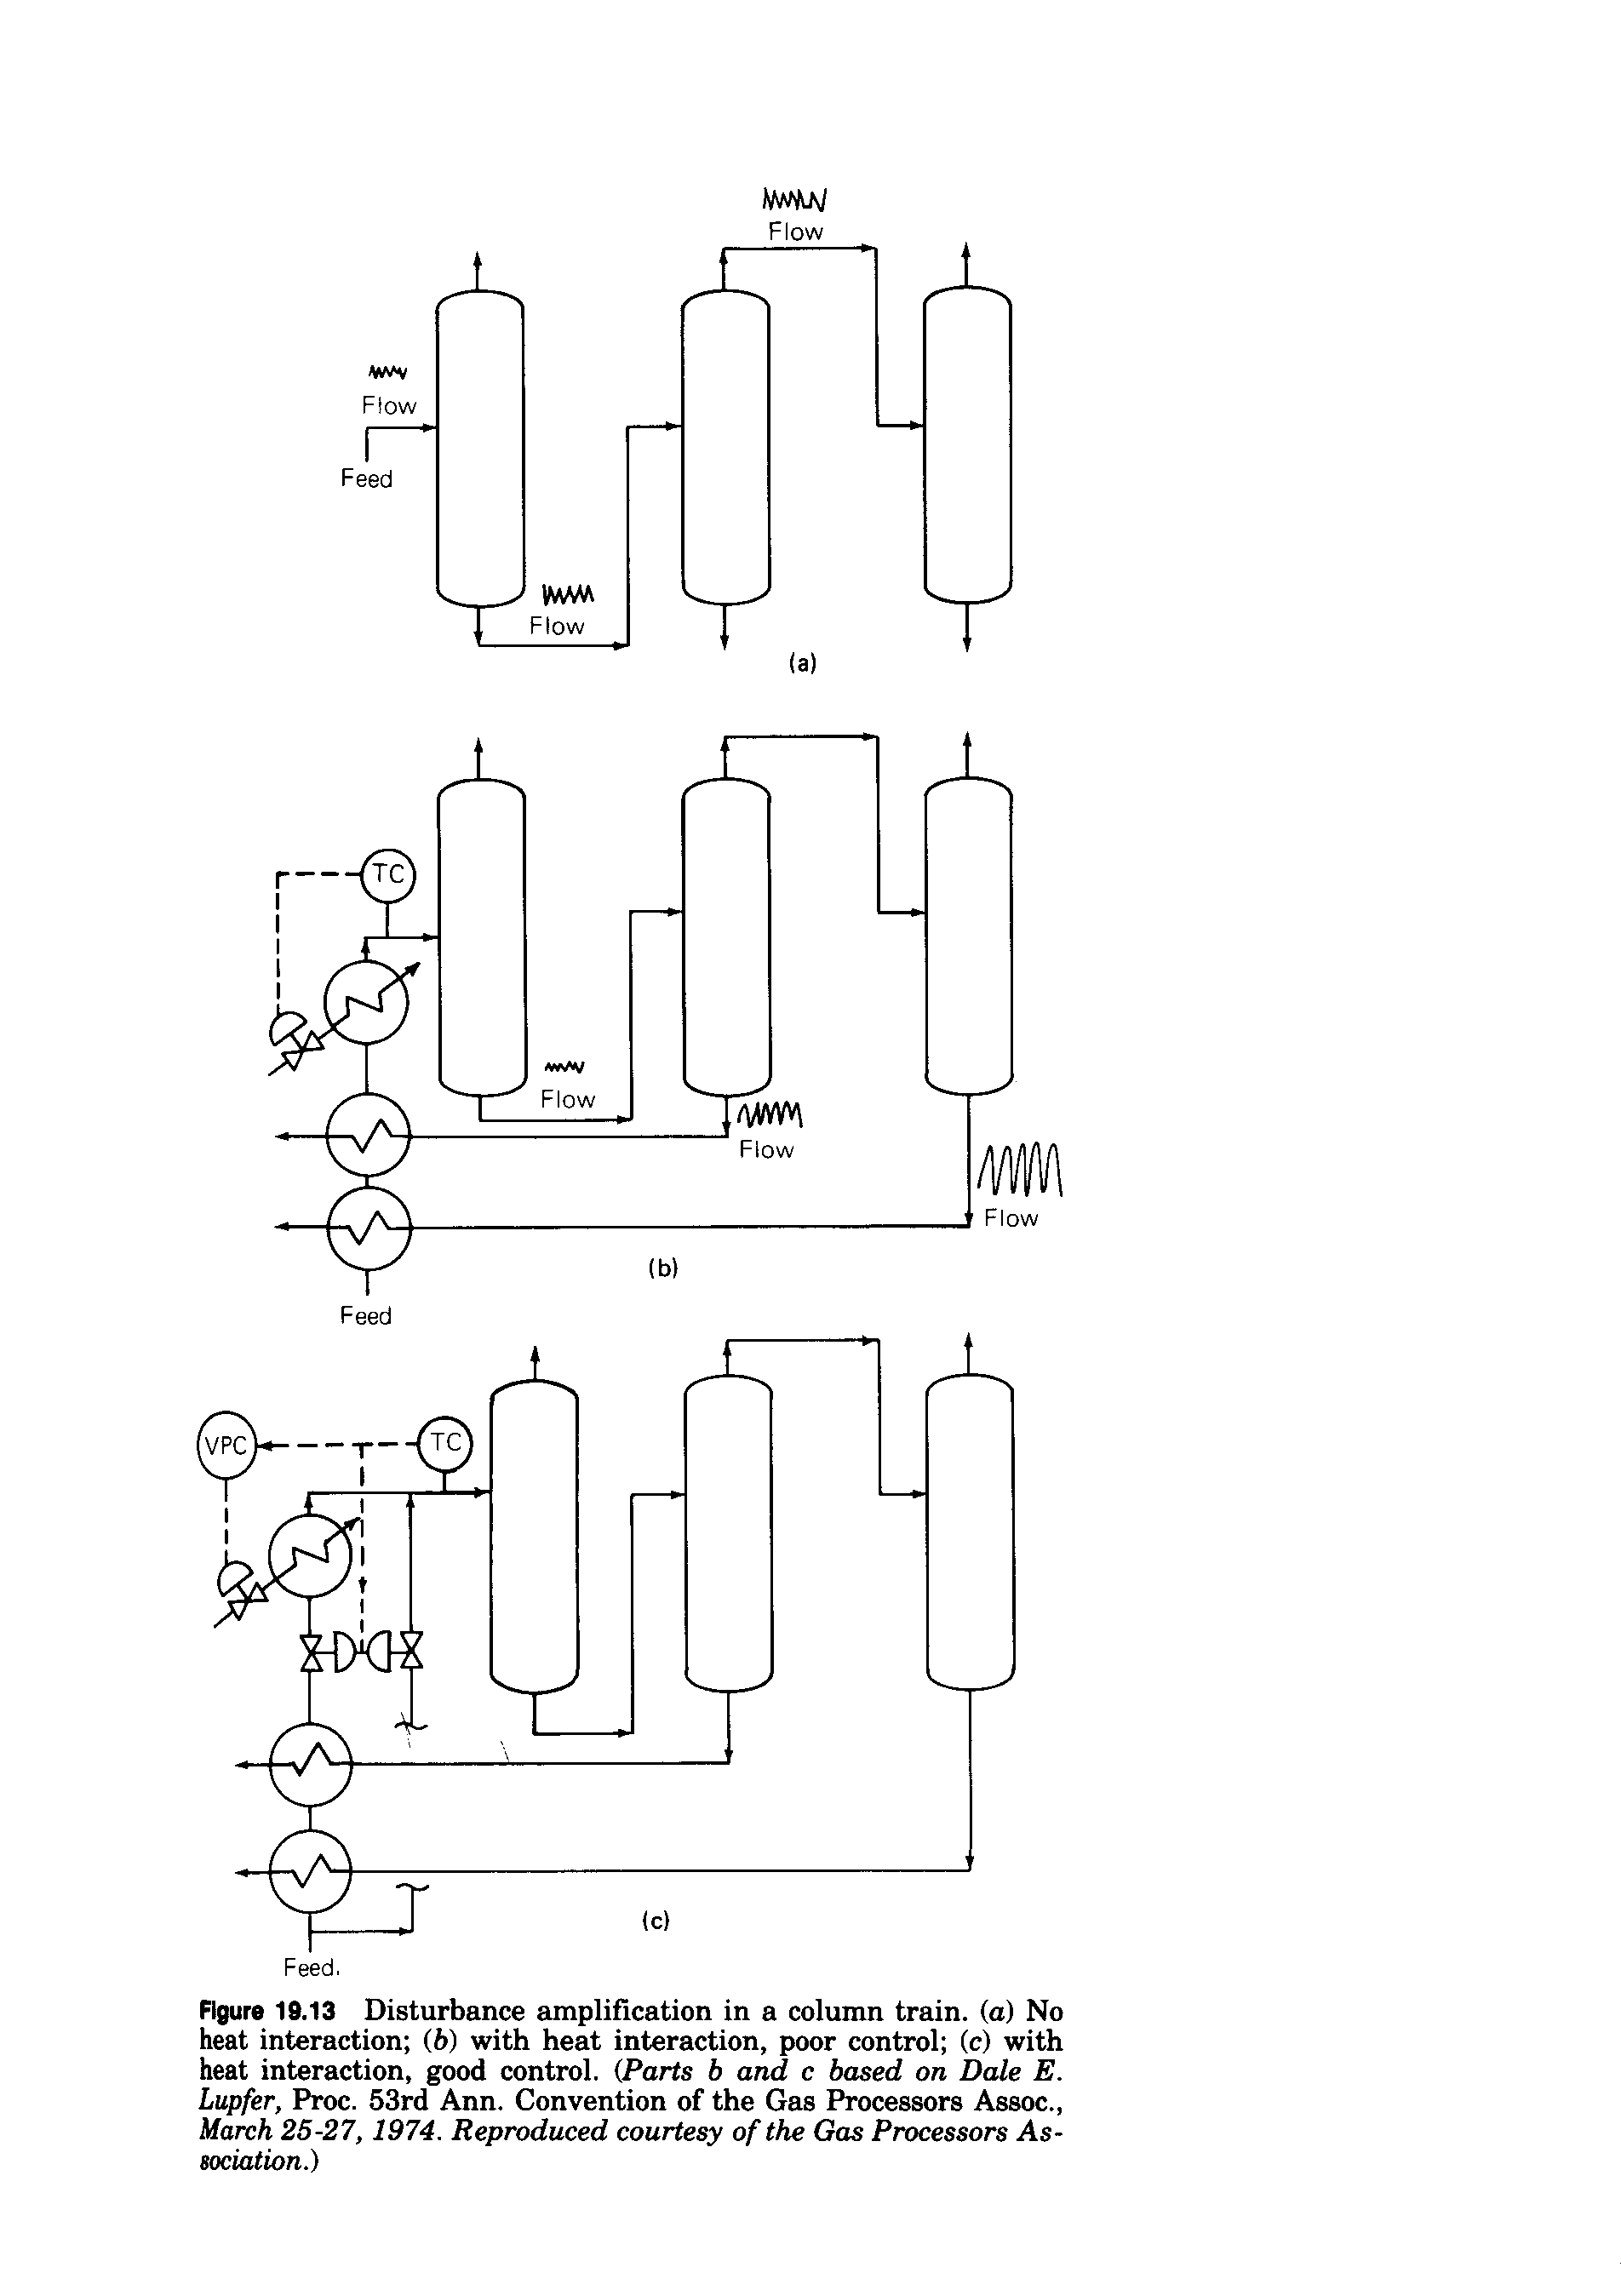 Figure 19.13 Disturbance amplification in a column train, (a) No heat interaction (6) with heat interaction, poor control (c) with heat interaction, good control. (Parts b and c based on Dak E. Lupfer, Proc. 53rd Ann. Convention of the Gas Processors Assoc., March 25-27,1974. Reproduced courtesy of the Gas Processors Association.)...